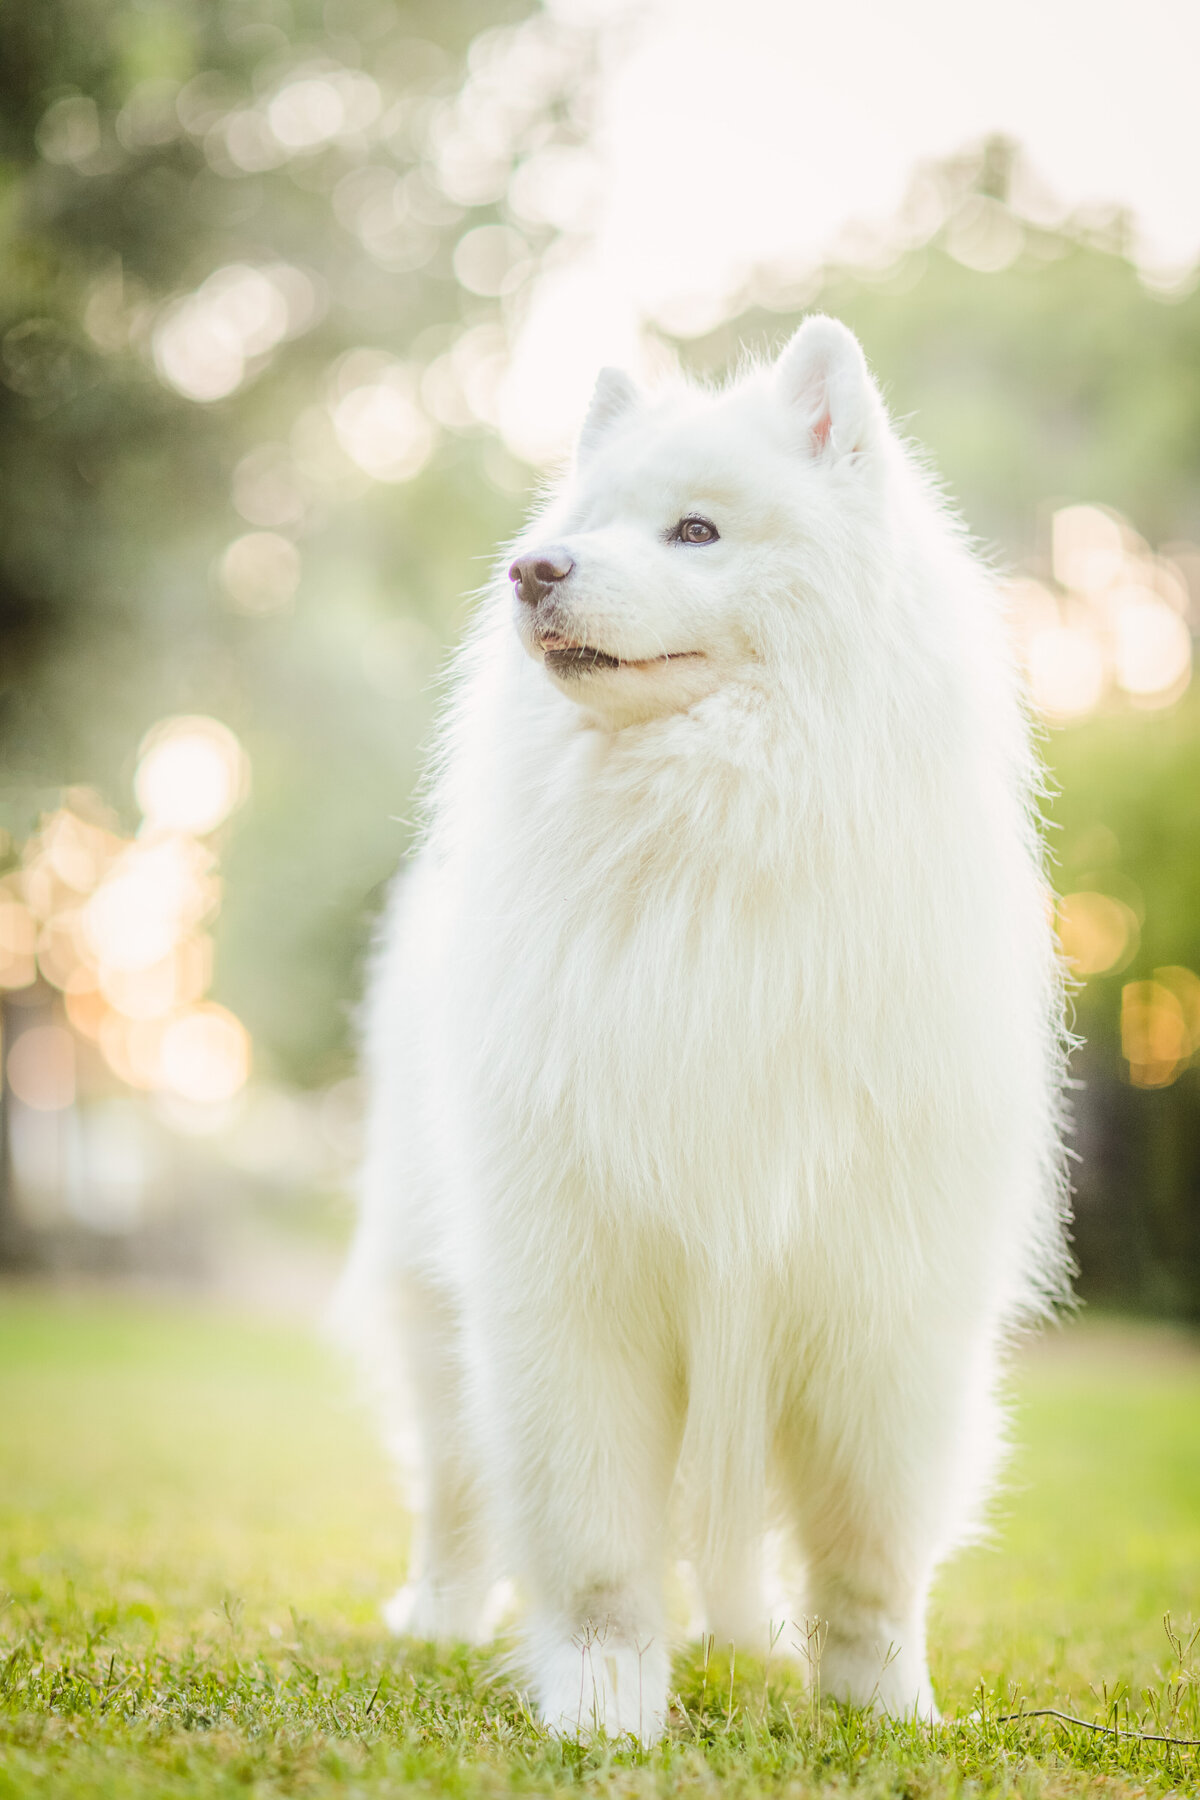 Outdoor pet portrait of a white dog